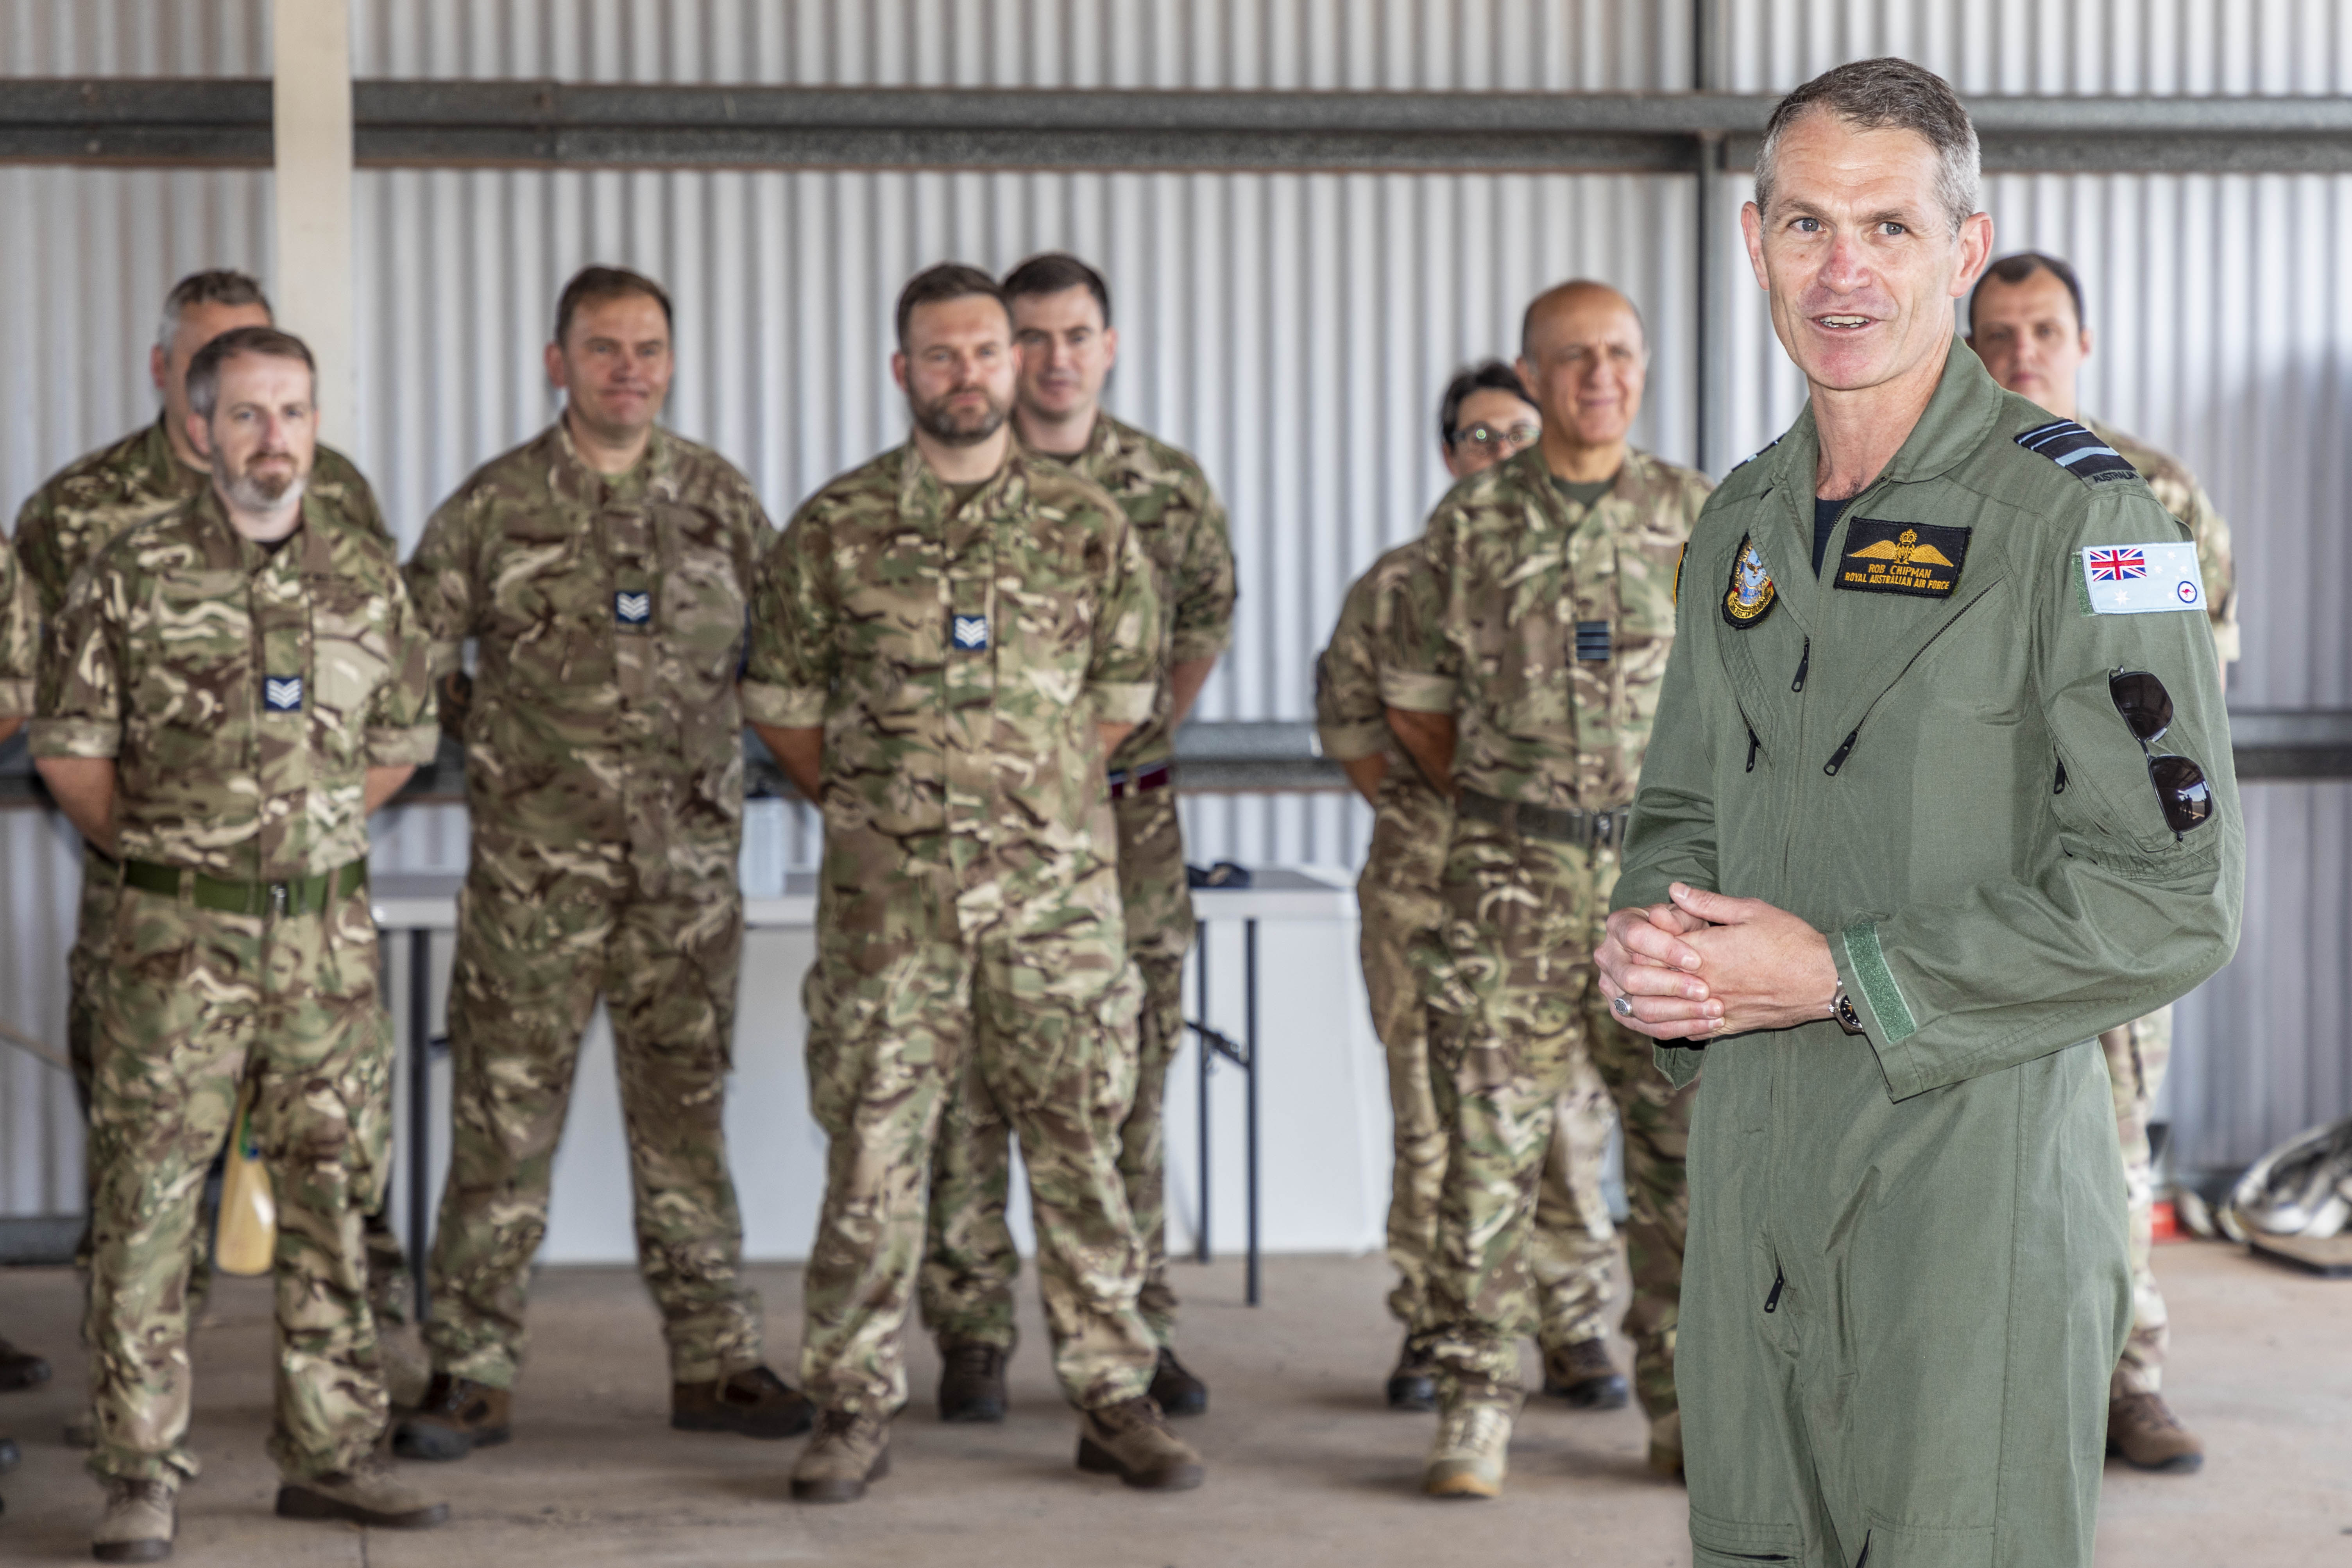 Image shows RAF Personnel standing together. 